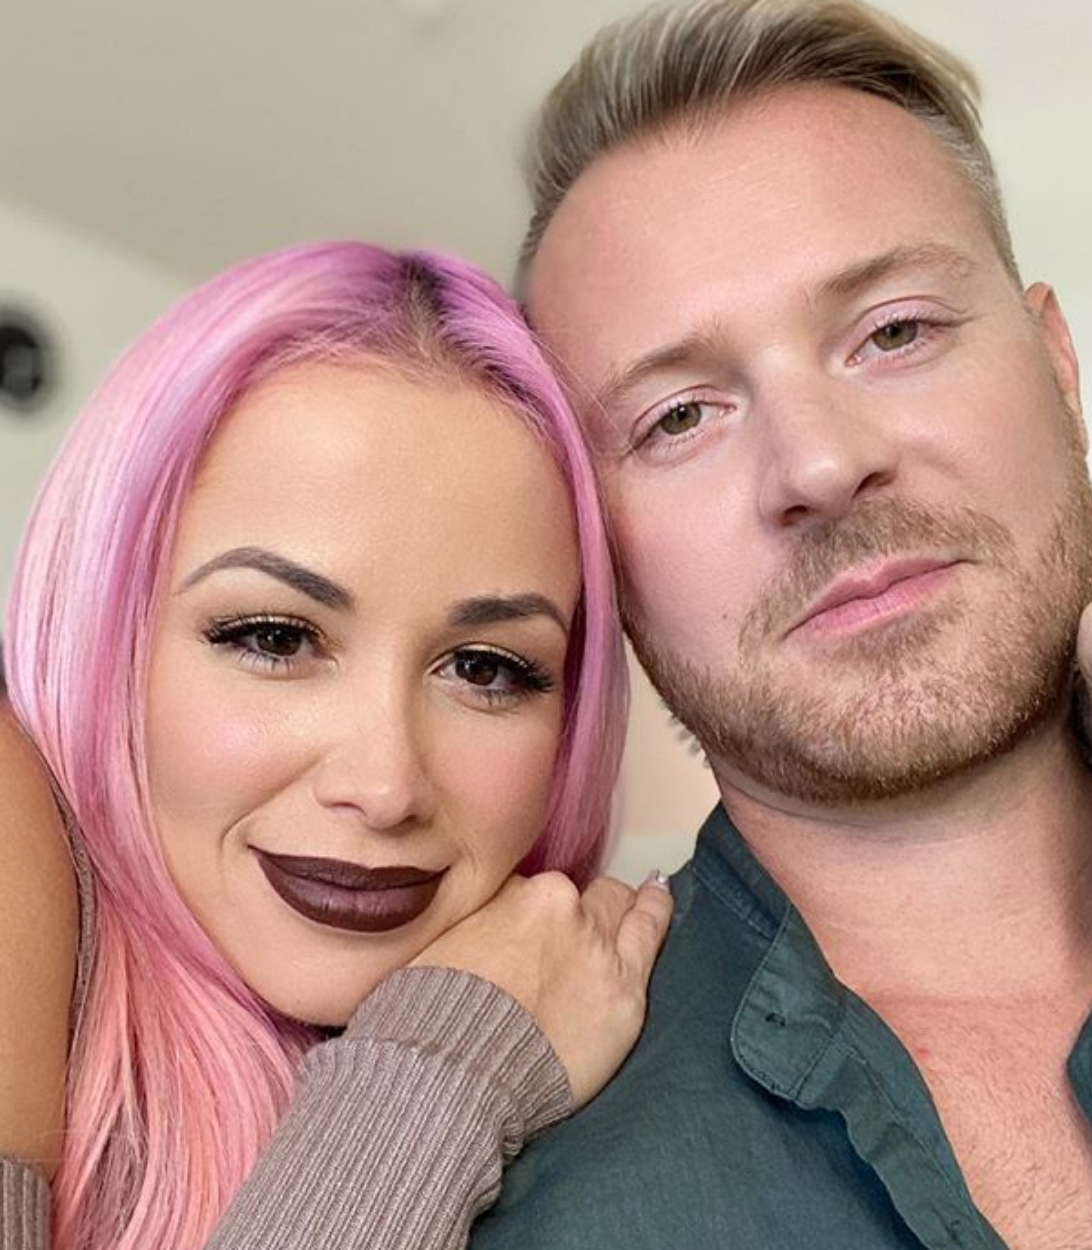 Paola-Mayfield-Russ-90-Day-Fiance-TLDR